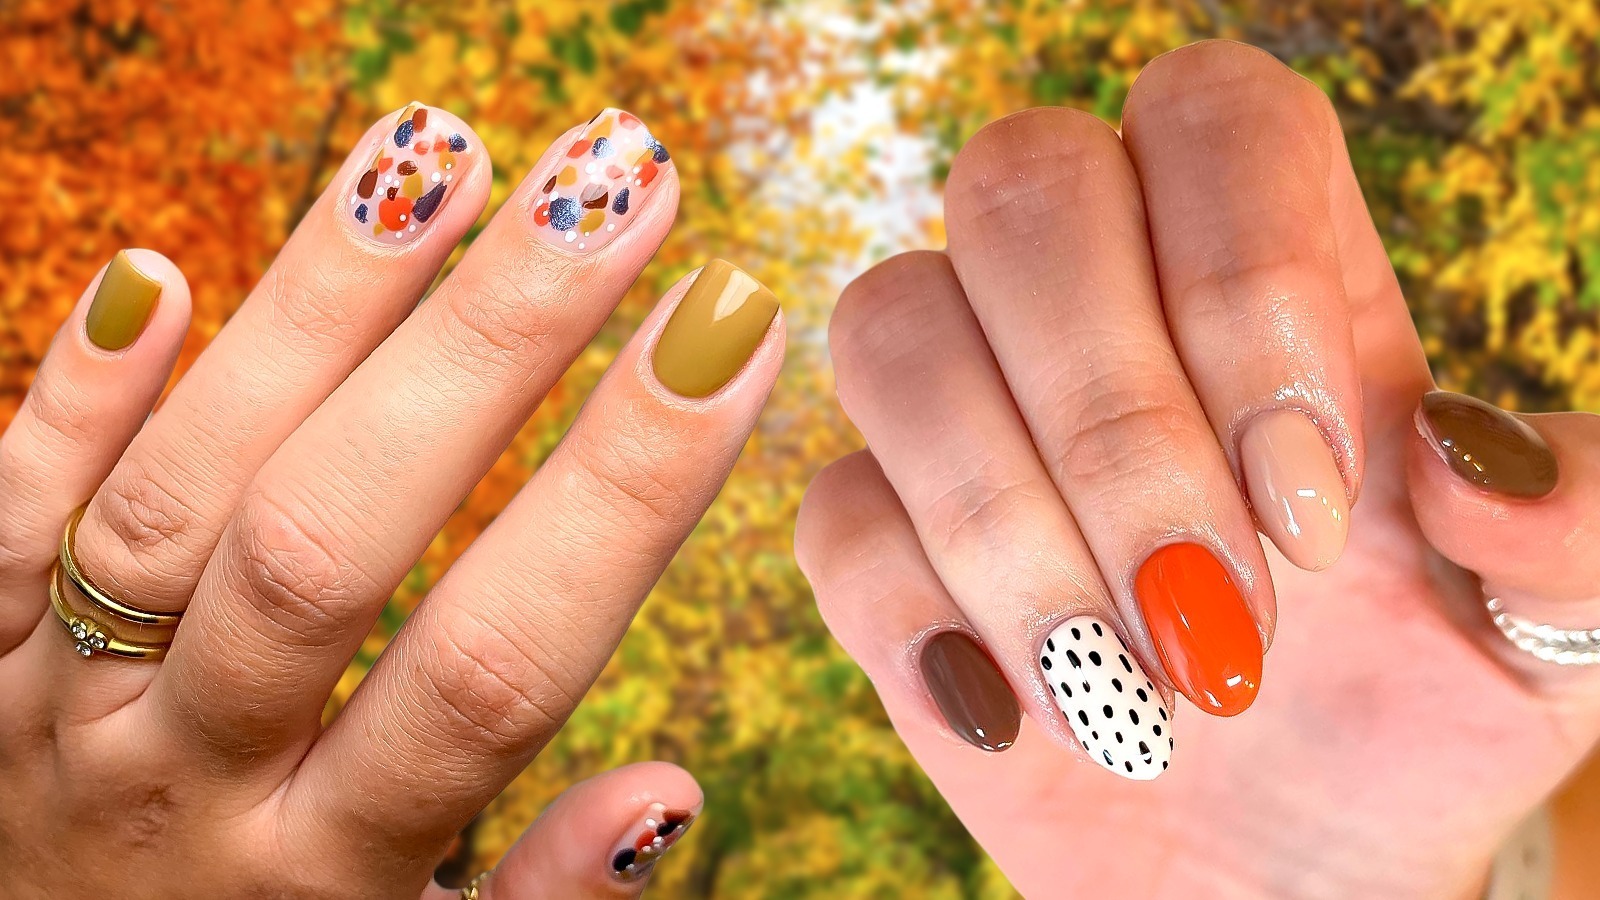 Some autumn nail art just finished 🍂 : r/RedditLaqueristas